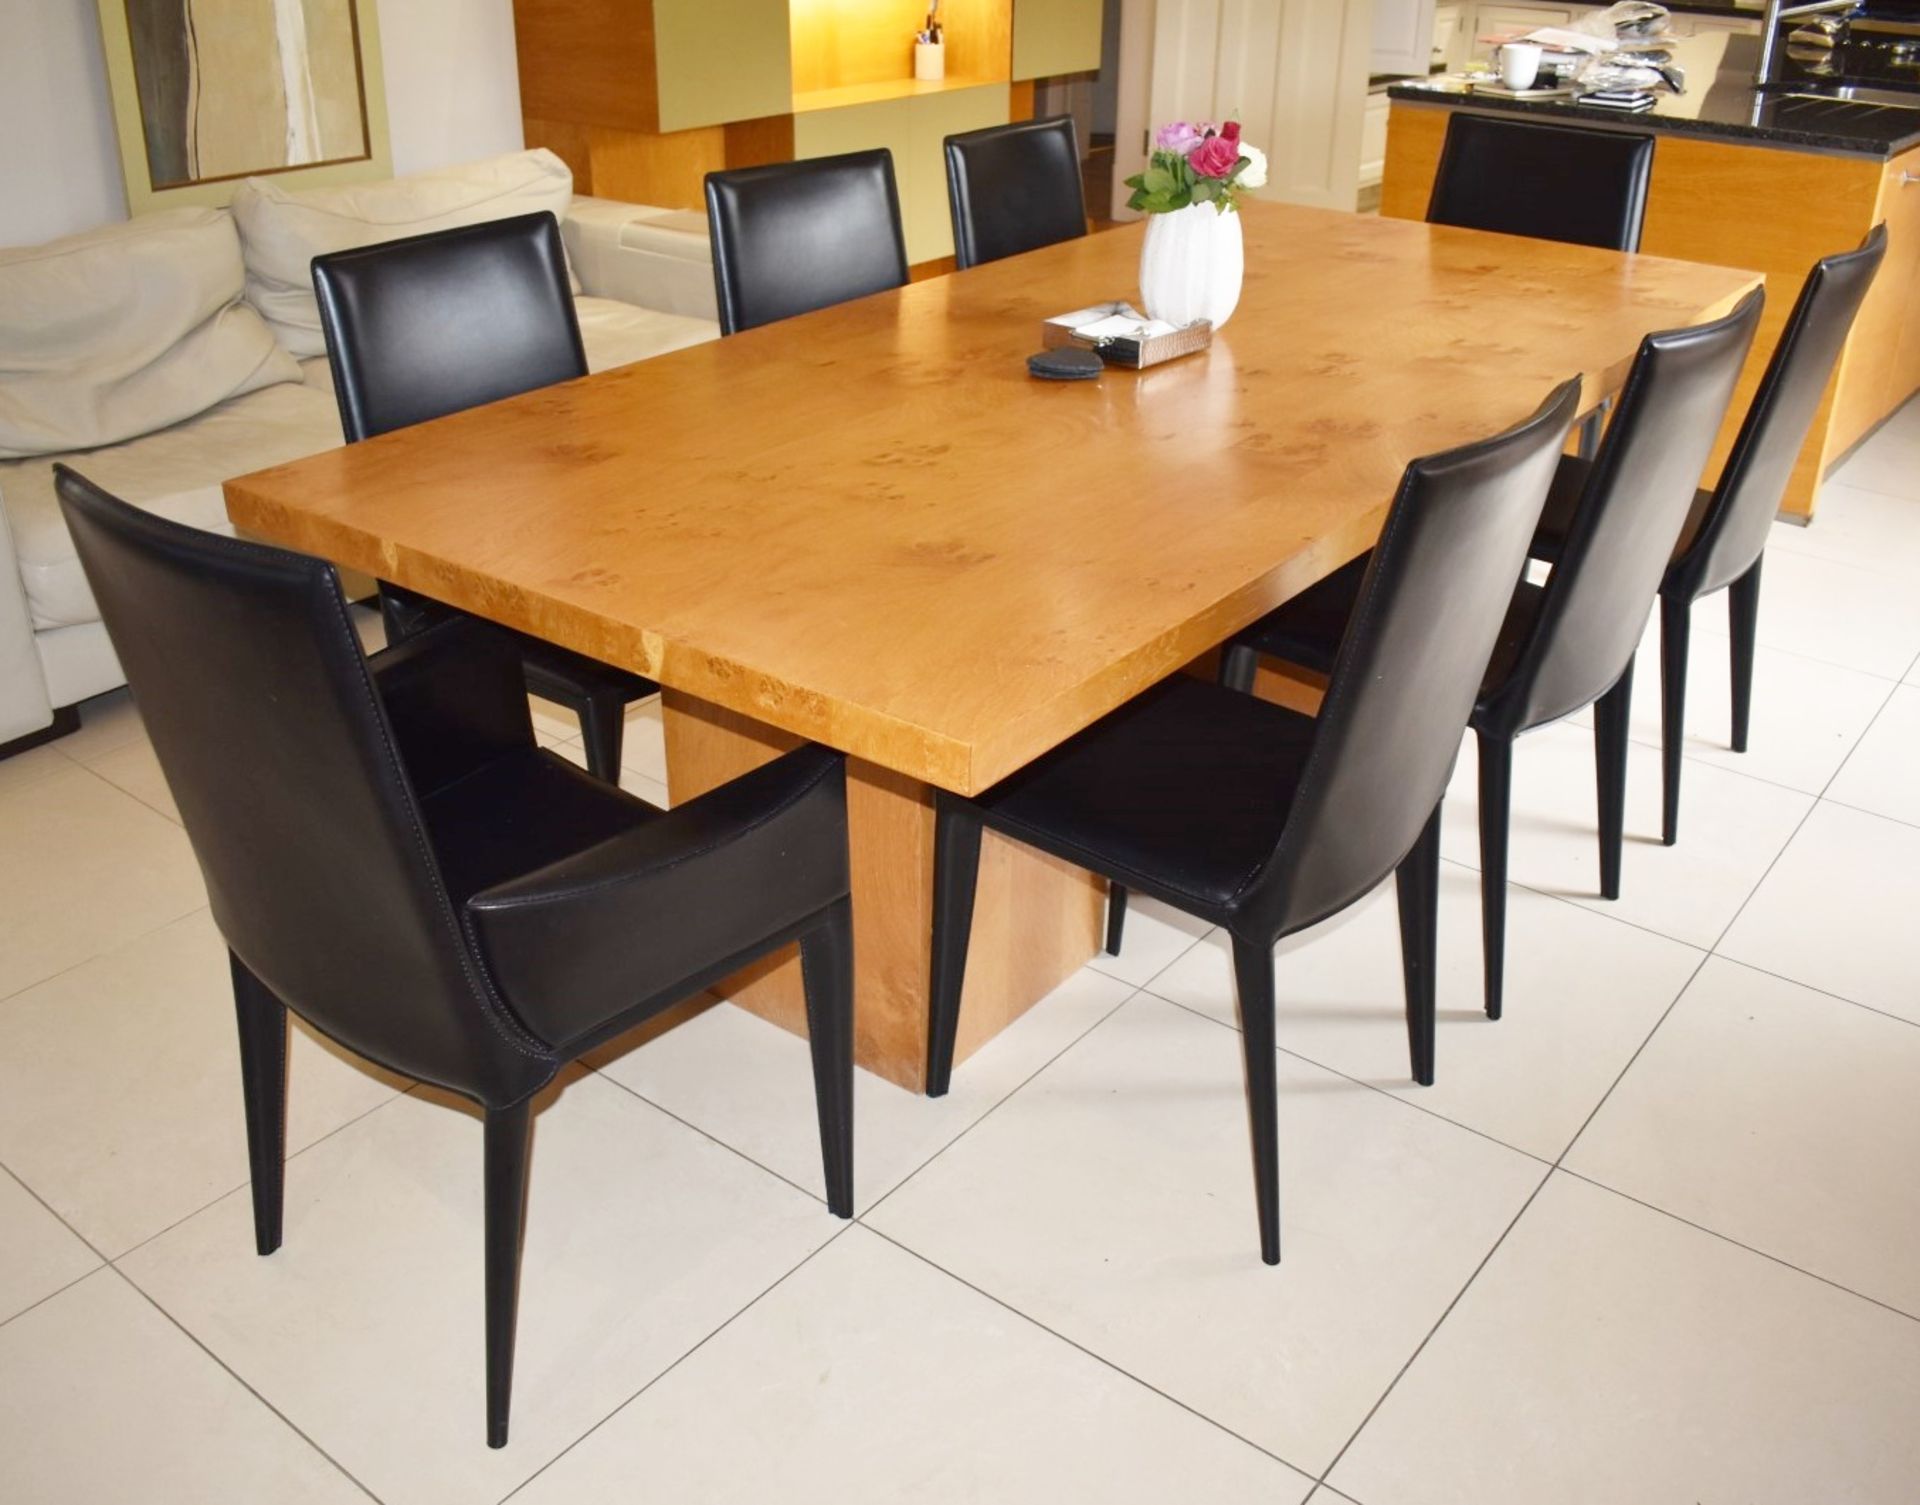 1 x Large Oak Dining Table With Eight Frag Italian Leather Dining Chairs - Extremely Heavy Oak Table